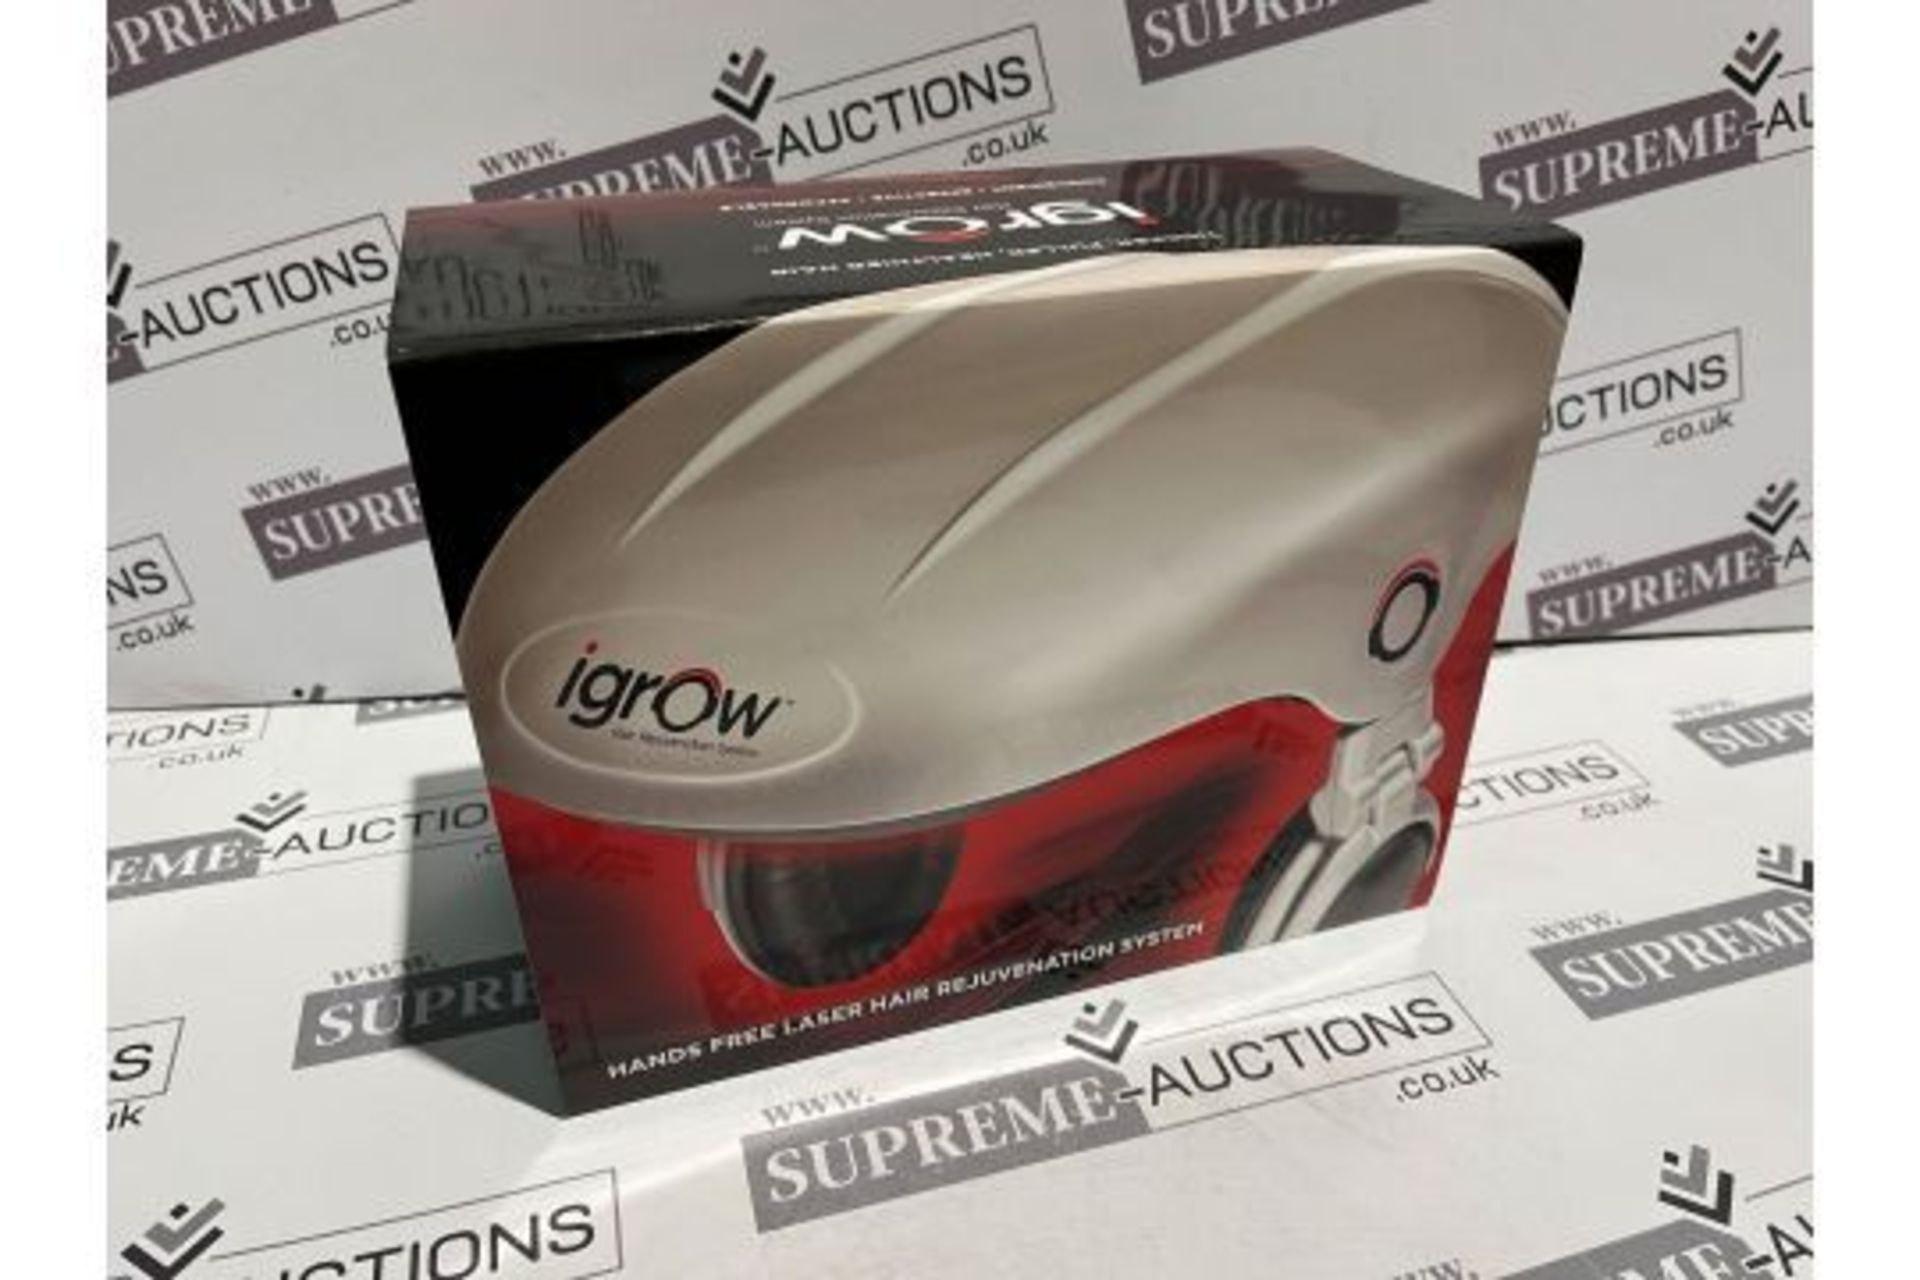 10 X Brand New iGrow Professional Laser Hair Growth System - FDA Cleared Laser Cap Hair Growth for